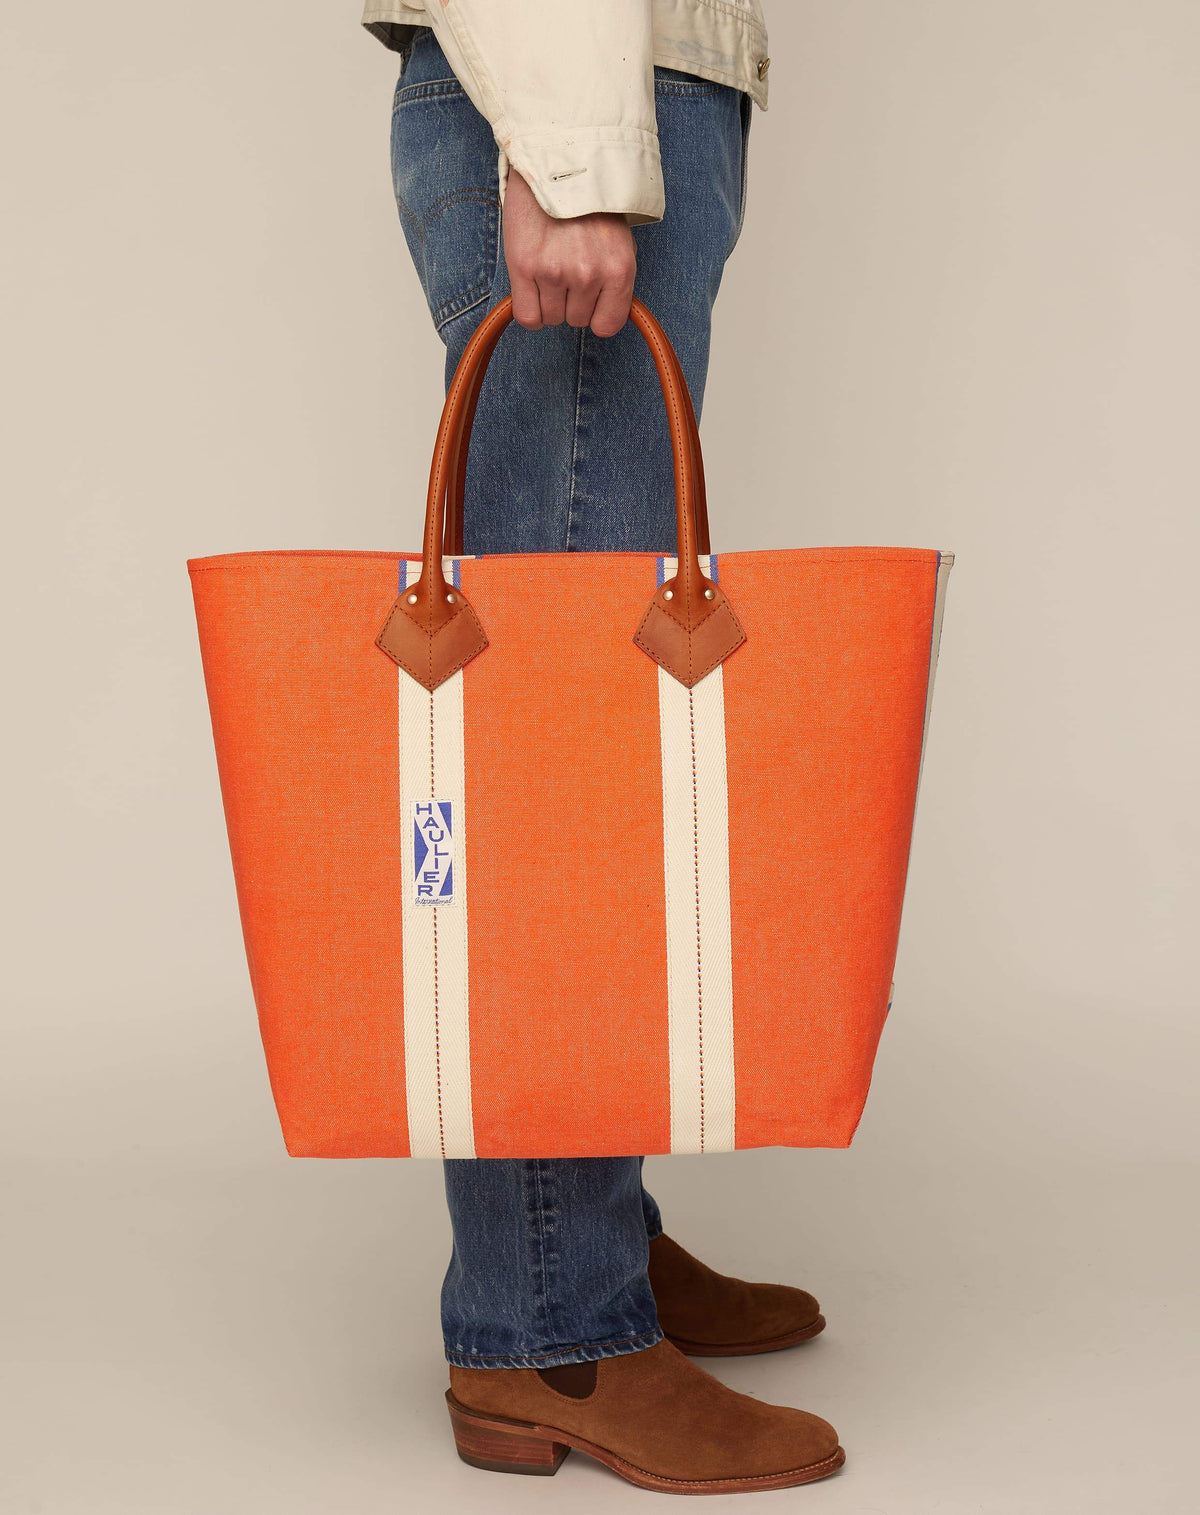 Image of person in jeans holding medium-sized classic canvas tote bag in orange colour with tan leather handles and contrasting stripes.